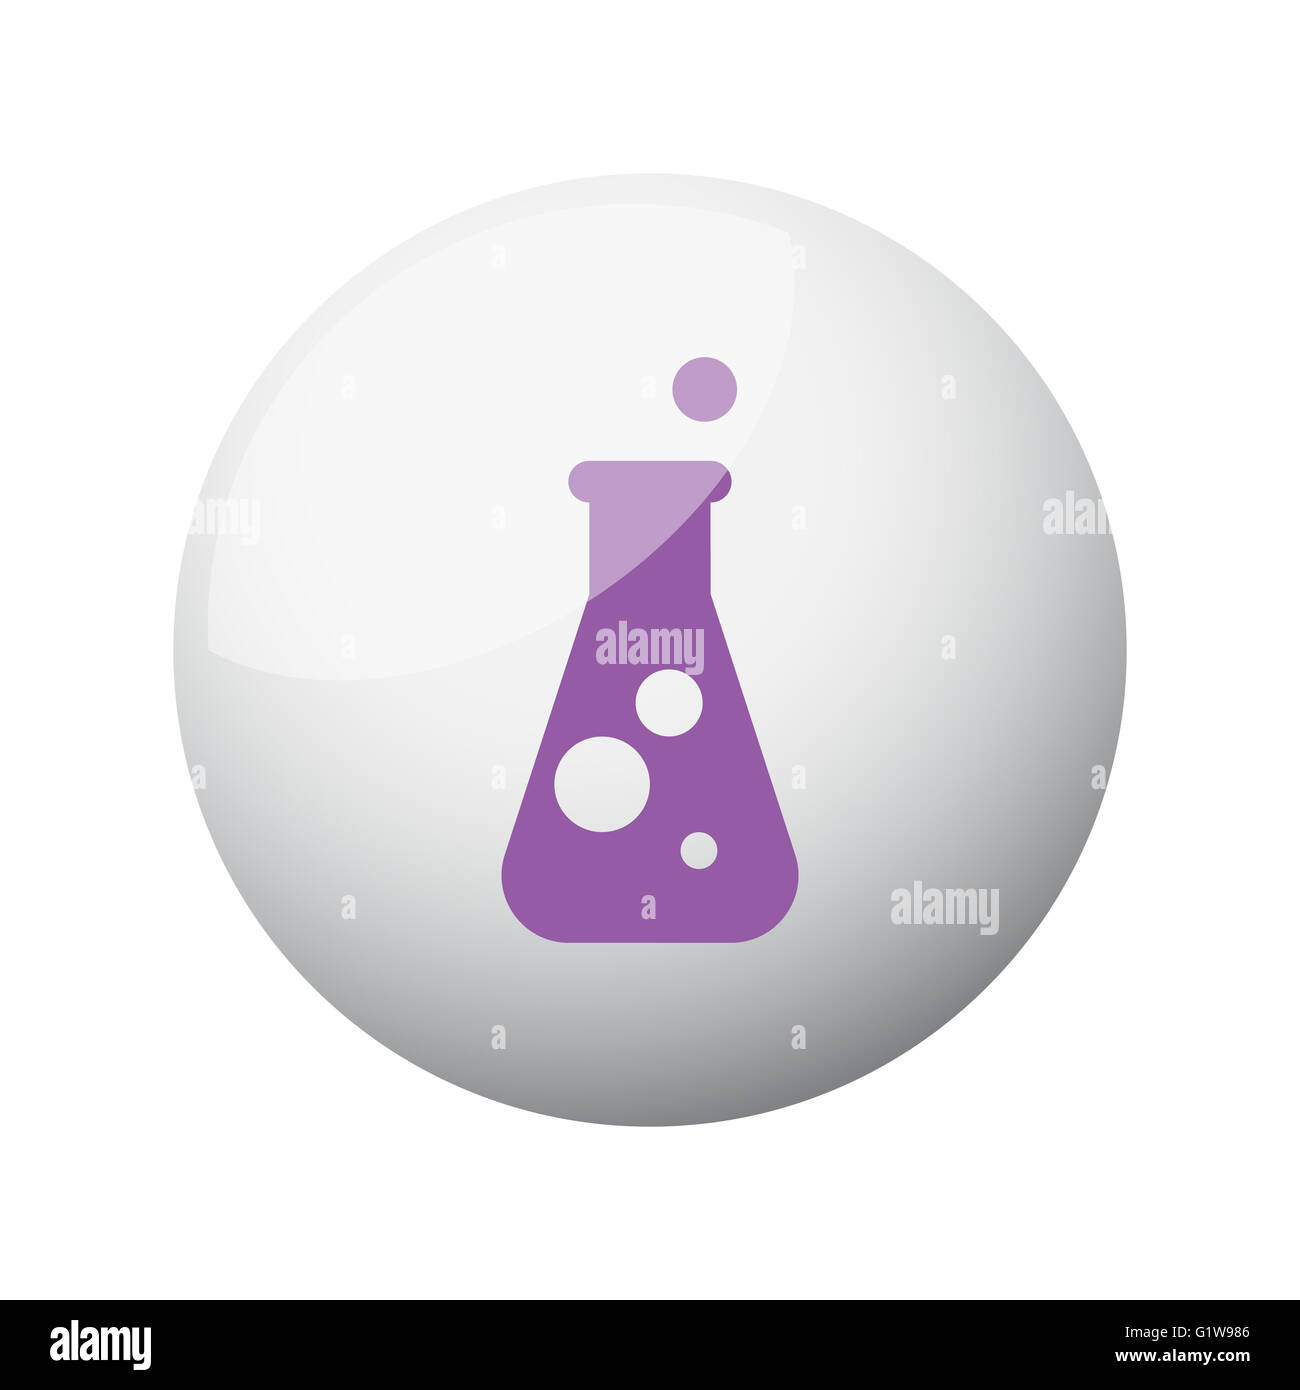 Flat purple Conical Flask icon on 3d sphere Stock Photo